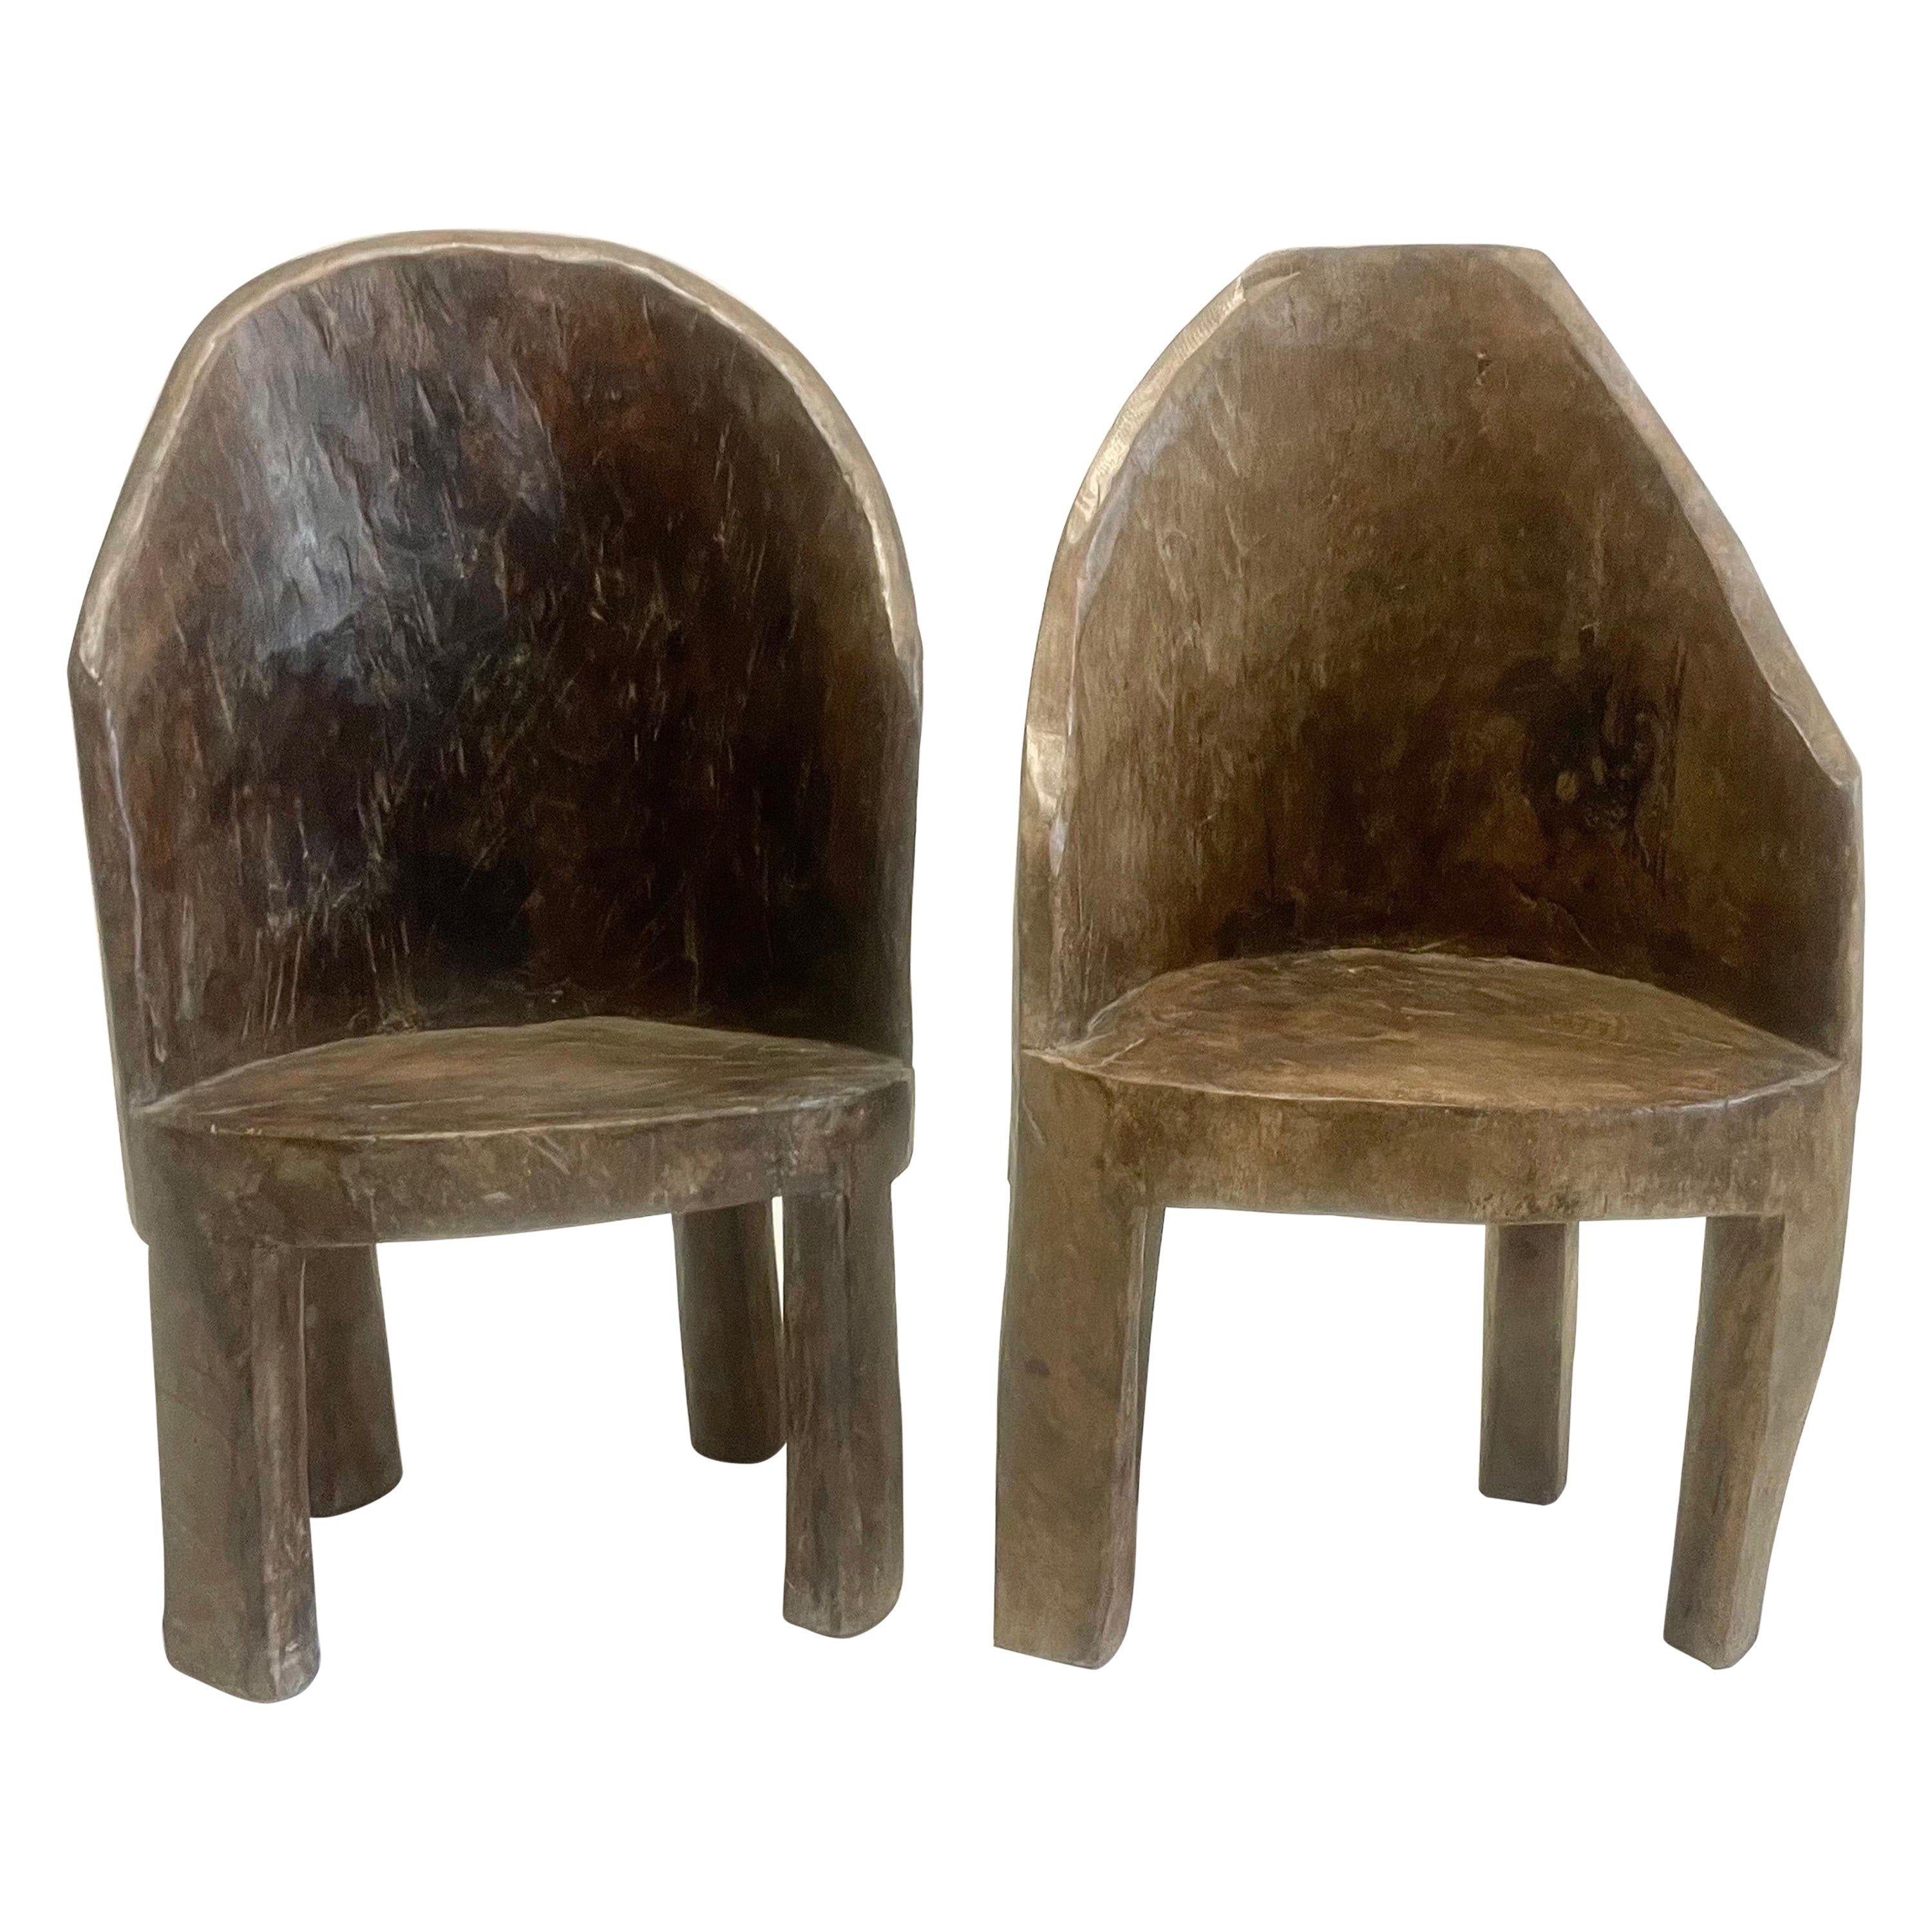 Pair of Child Size Carved Wood Antique Chairs  For Sale